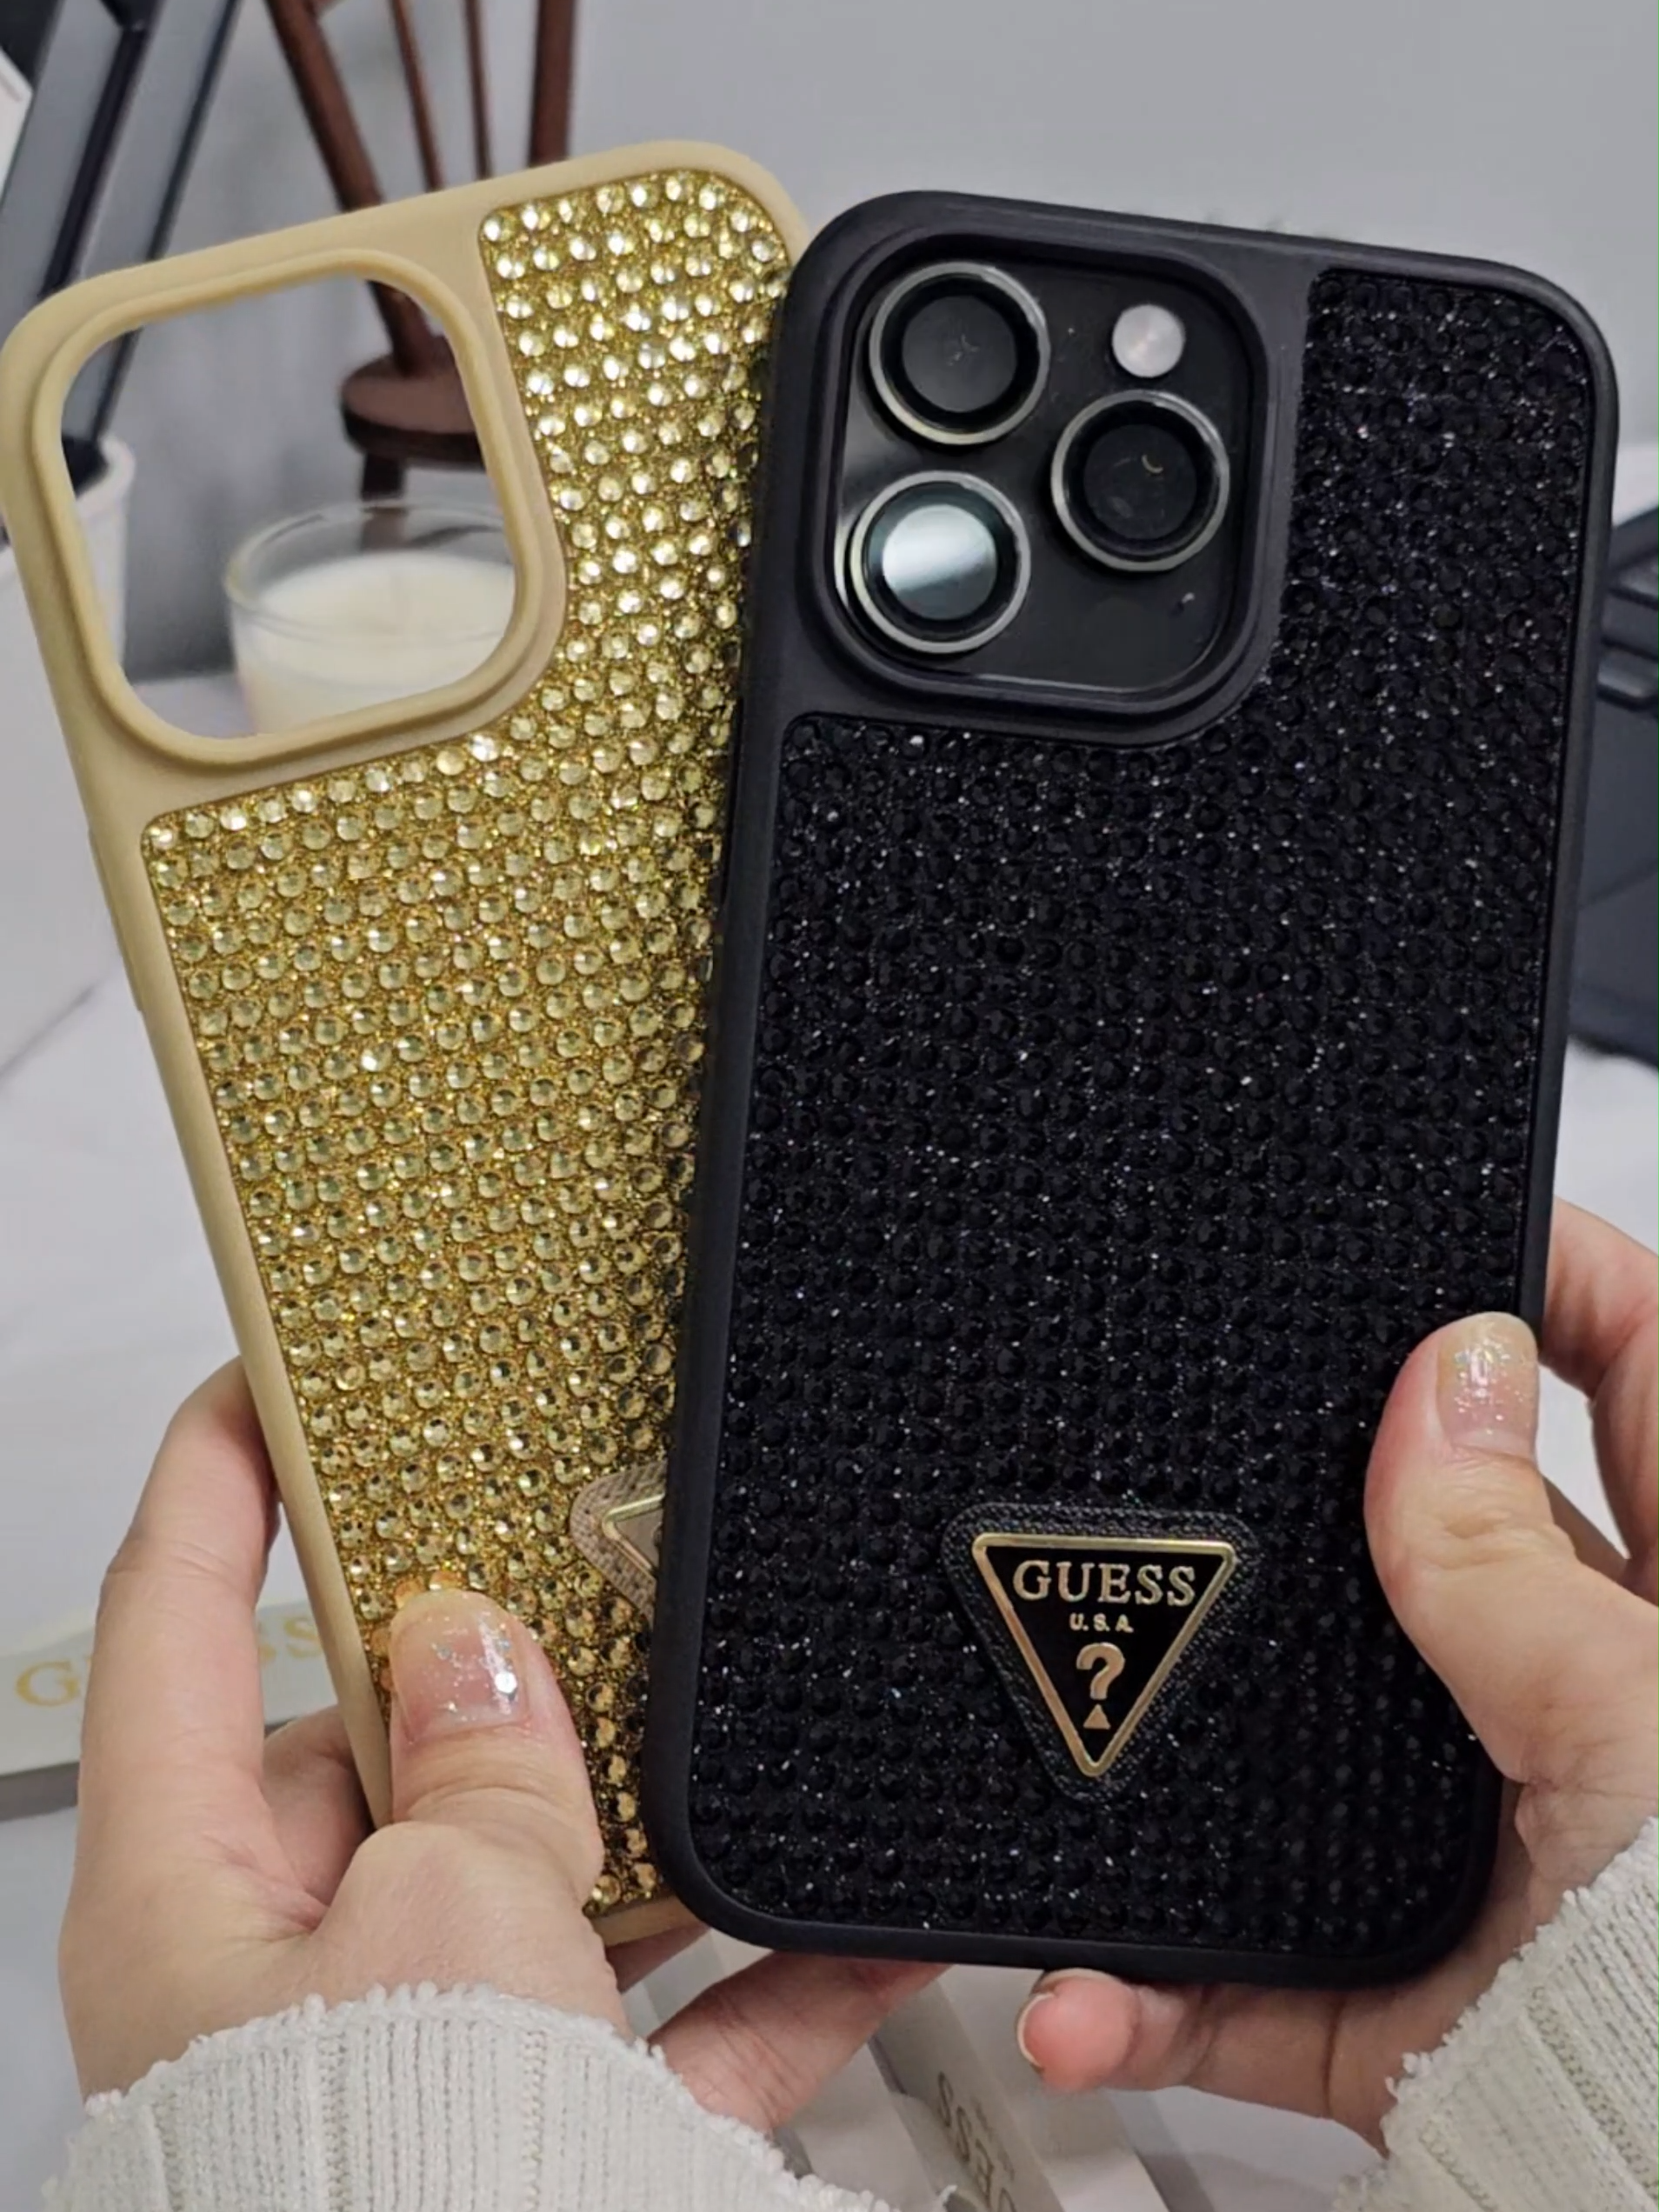 [OFFICIAL LICENSED] Unboxing GUESS IPhone Case RHINESTONE TRIANGLE   #Guess#casing #branded #hottrend #products #guesslover #unboxing #diamond #rhinestones